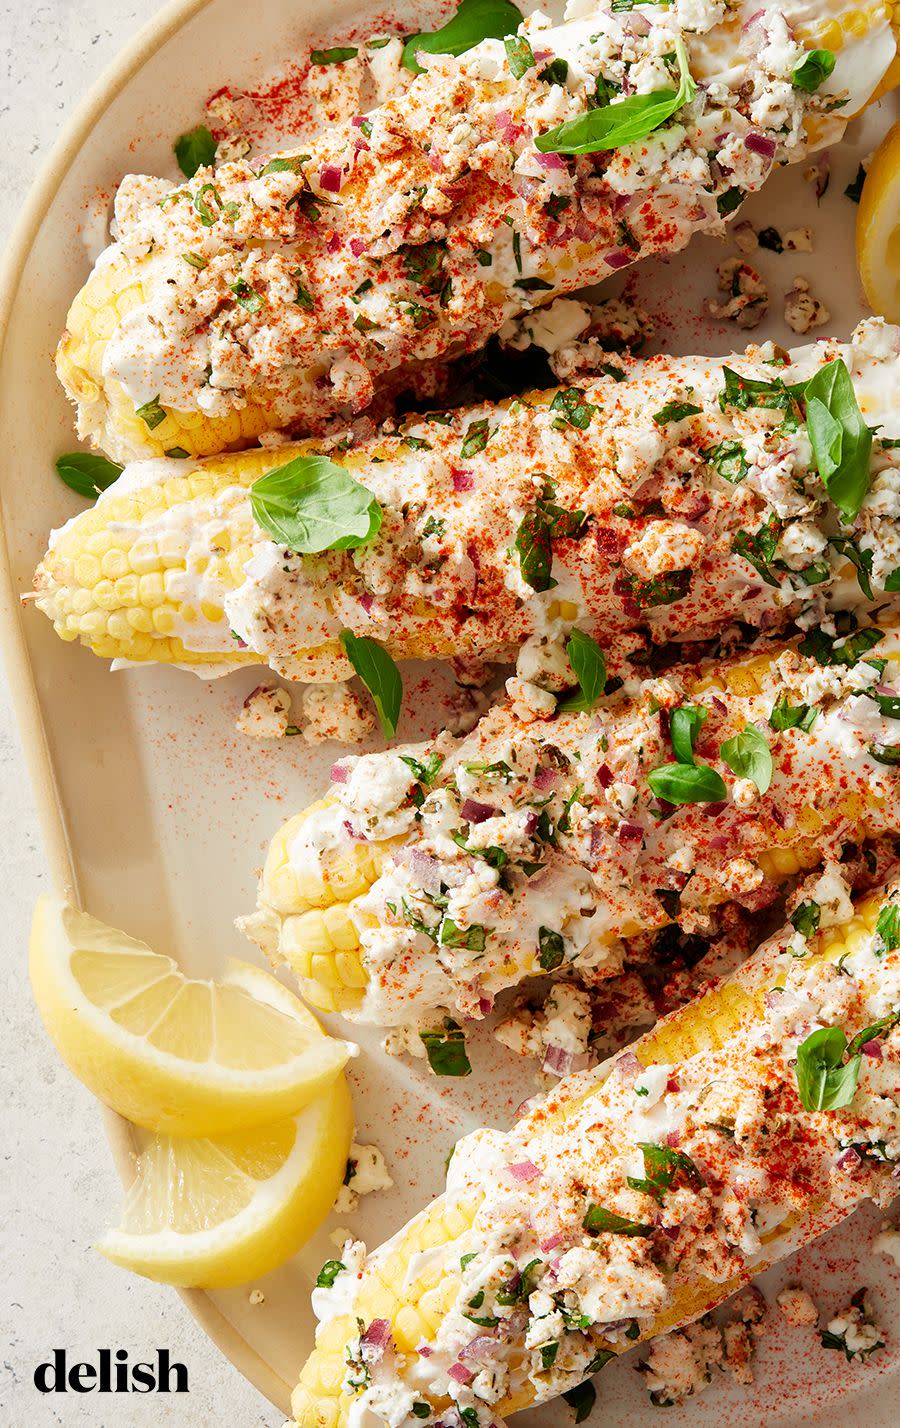 <p><a href="https://www.delish.com/cooking/recipe-ideas/recipes/a47269/mexican-street-corn-elote-recipe/" rel="nofollow noopener" target="_blank" data-ylk="slk:Elote, or Mexican street corn" class="link ">Elote, or Mexican street corn</a>—relies on cotija to keep the toppings in place. Here, we've swapped in Greek yogurt (and feta, oregano, red onion, and basil) for a <a href="https://www.delish.com/cooking/g4016/greek-food-recipes/" rel="nofollow noopener" target="_blank" data-ylk="slk:Greek" class="link ">Greek</a>-inspired version you're going to love.</p><p>Get the <strong><a href="https://www.delish.com/cooking/recipe-ideas/a39740613/air-fryer-corn-on-the-cob-recipe/" rel="nofollow noopener" target="_blank" data-ylk="slk:Air Fryer Corn On The Cob recipe" class="link ">Air Fryer Corn On The Cob recipe</a></strong>.</p>